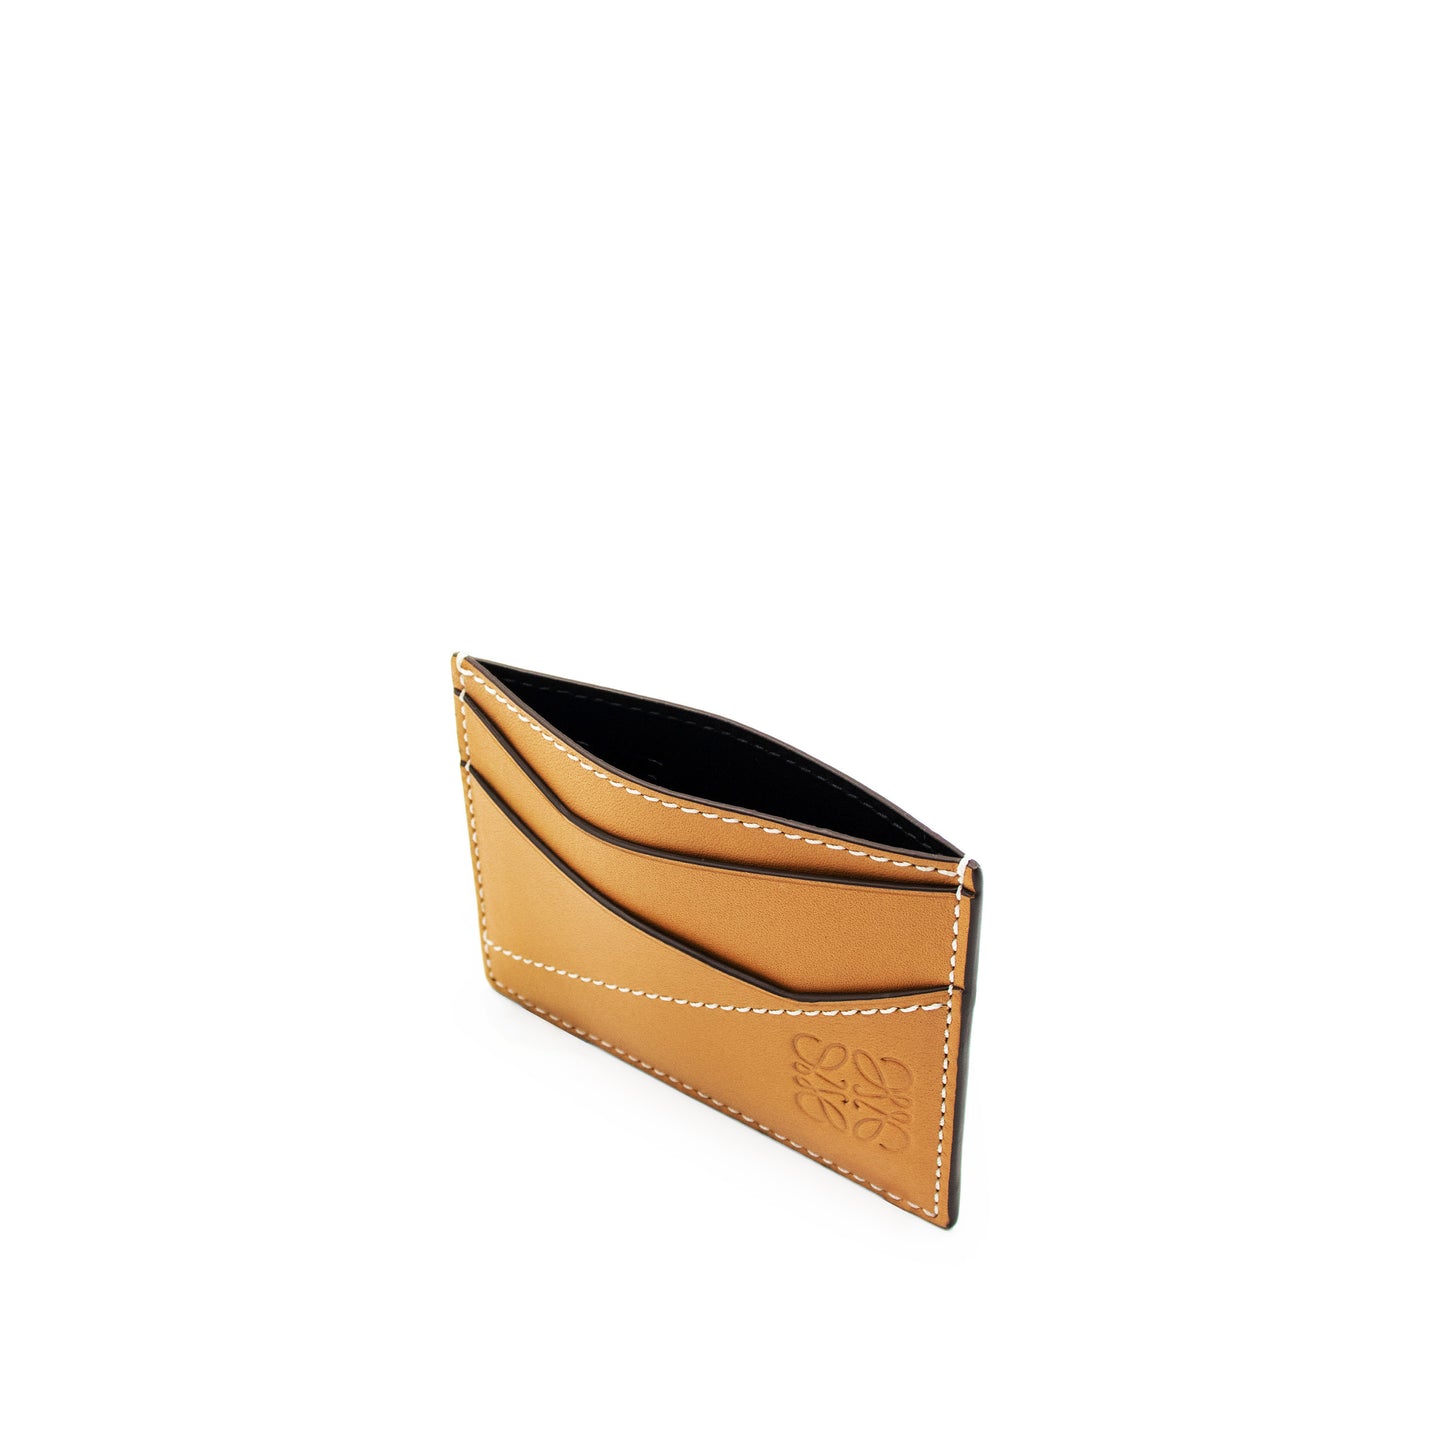 Puzzle Stitches Plain Cardholder in Smooth Calfskin in Light Caramel